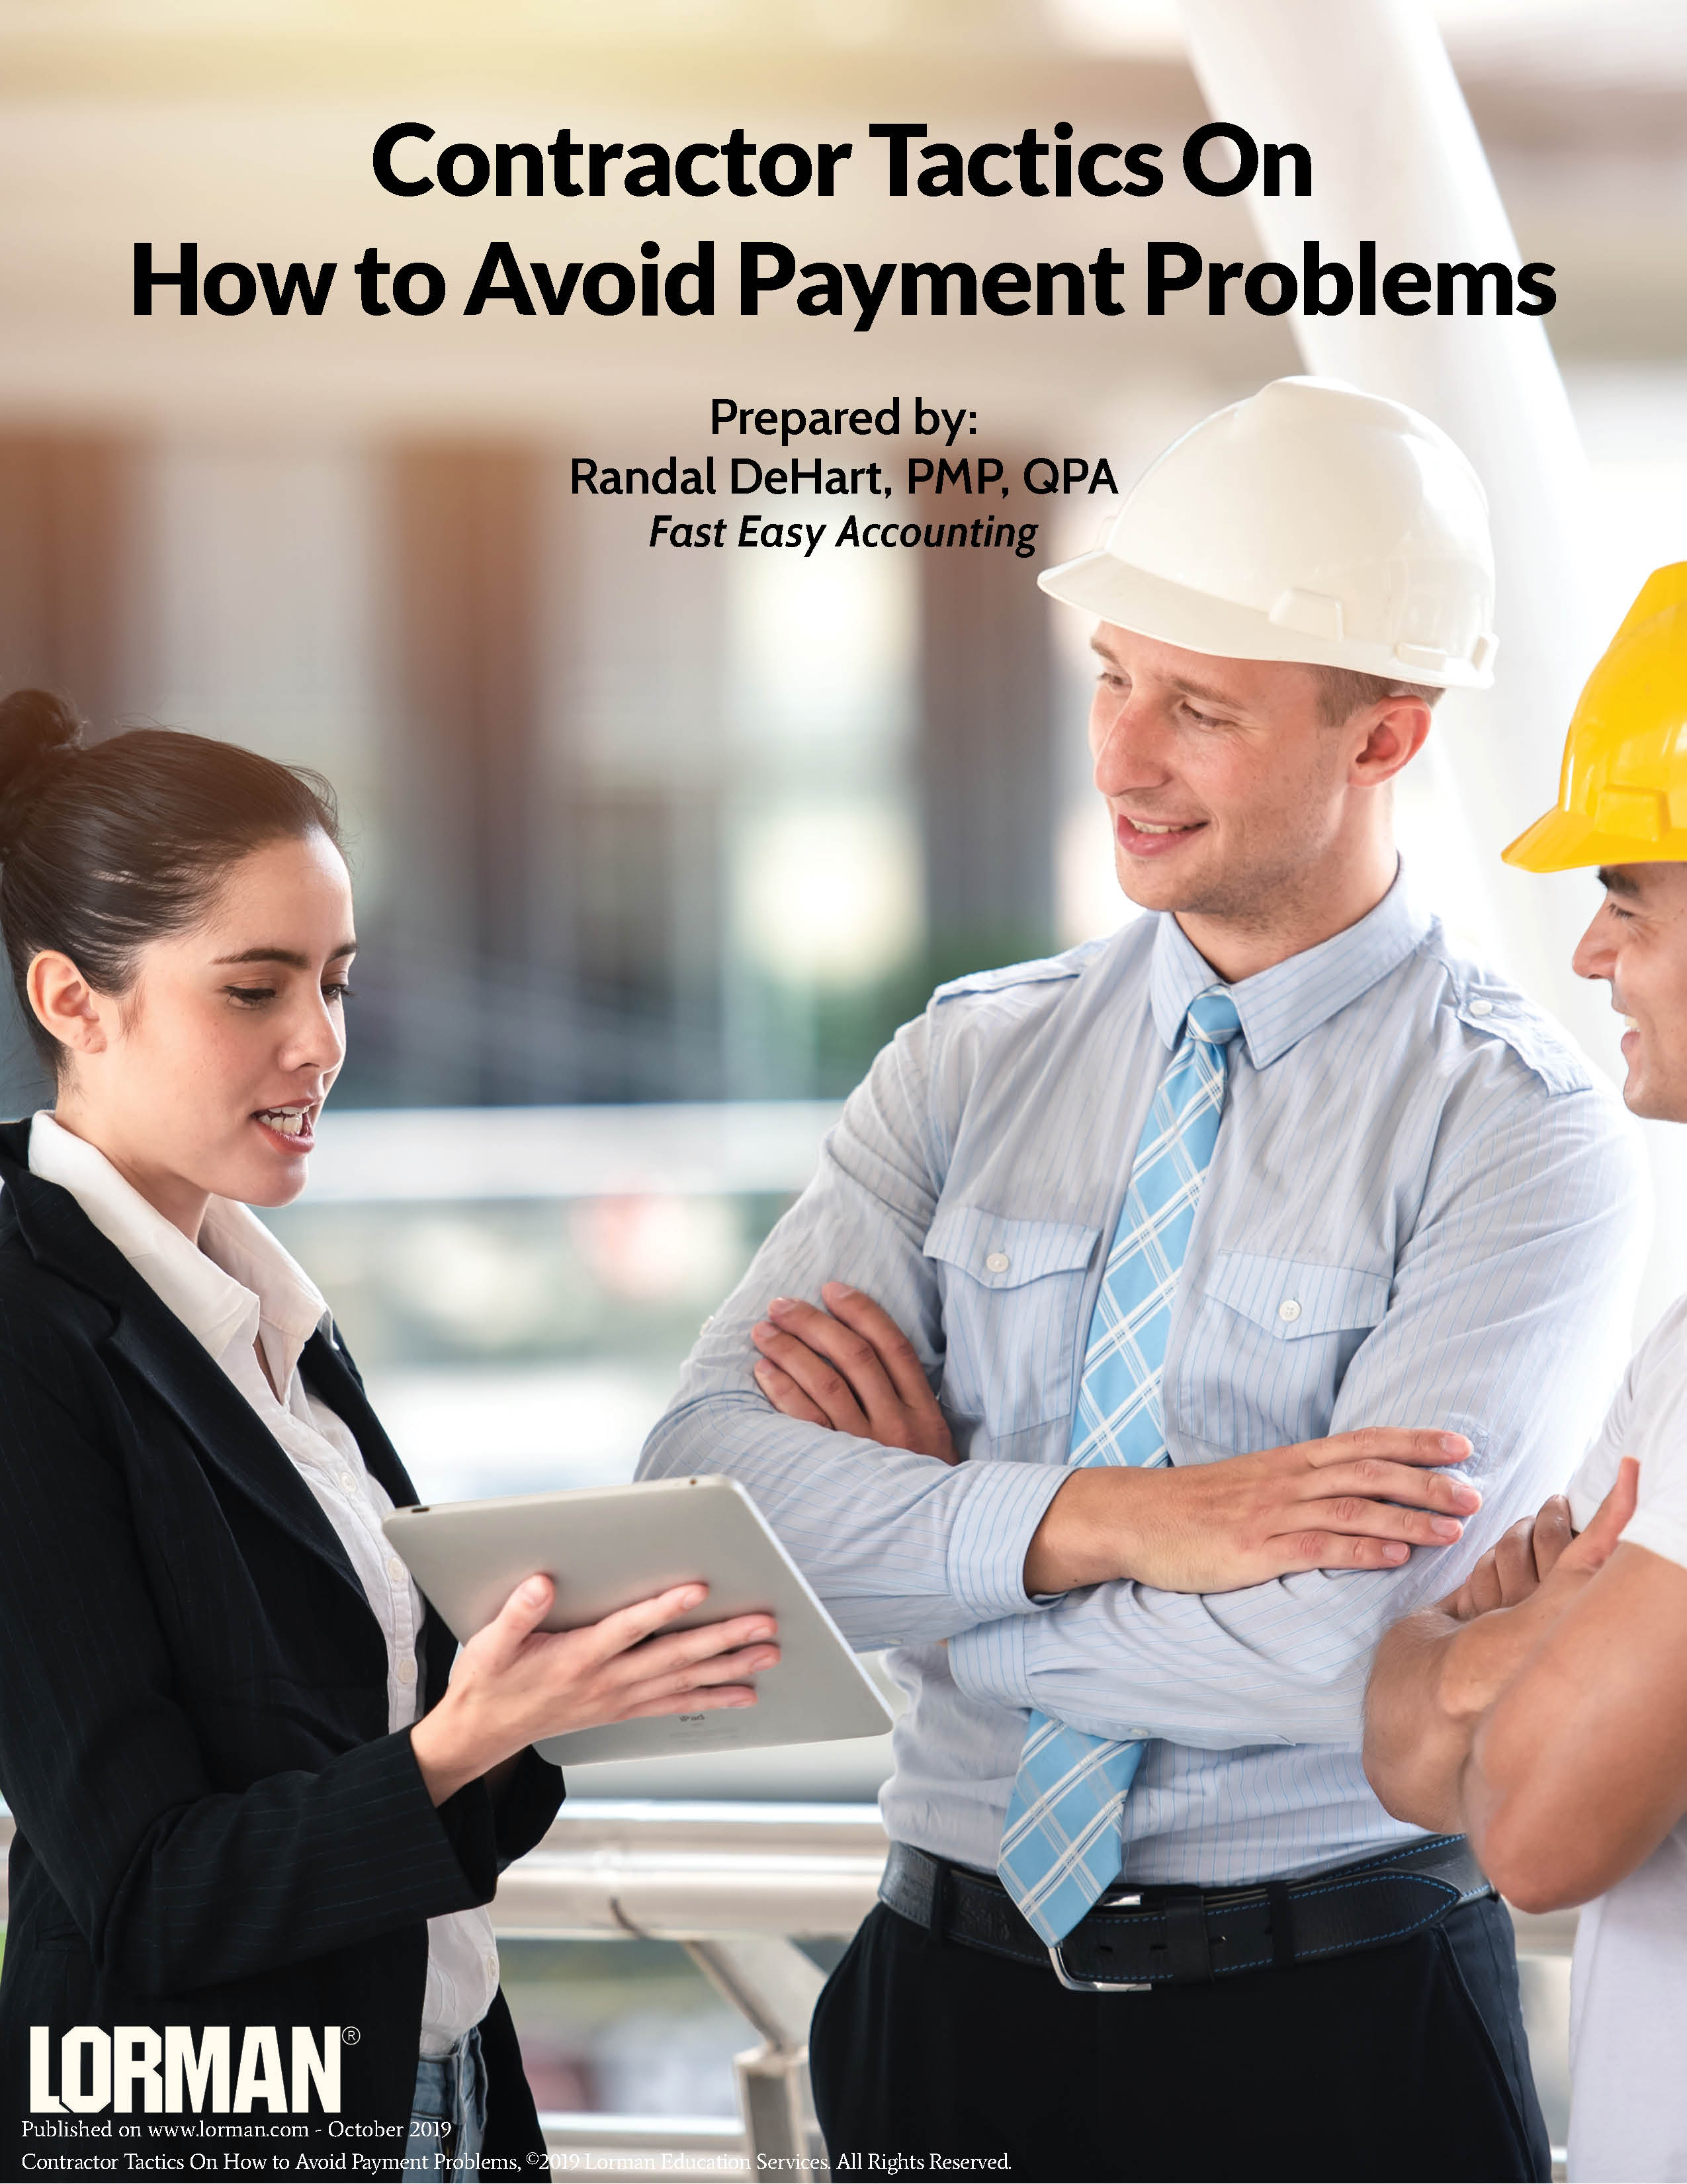 Contractor Tactics On How to Avoid Payment Problems